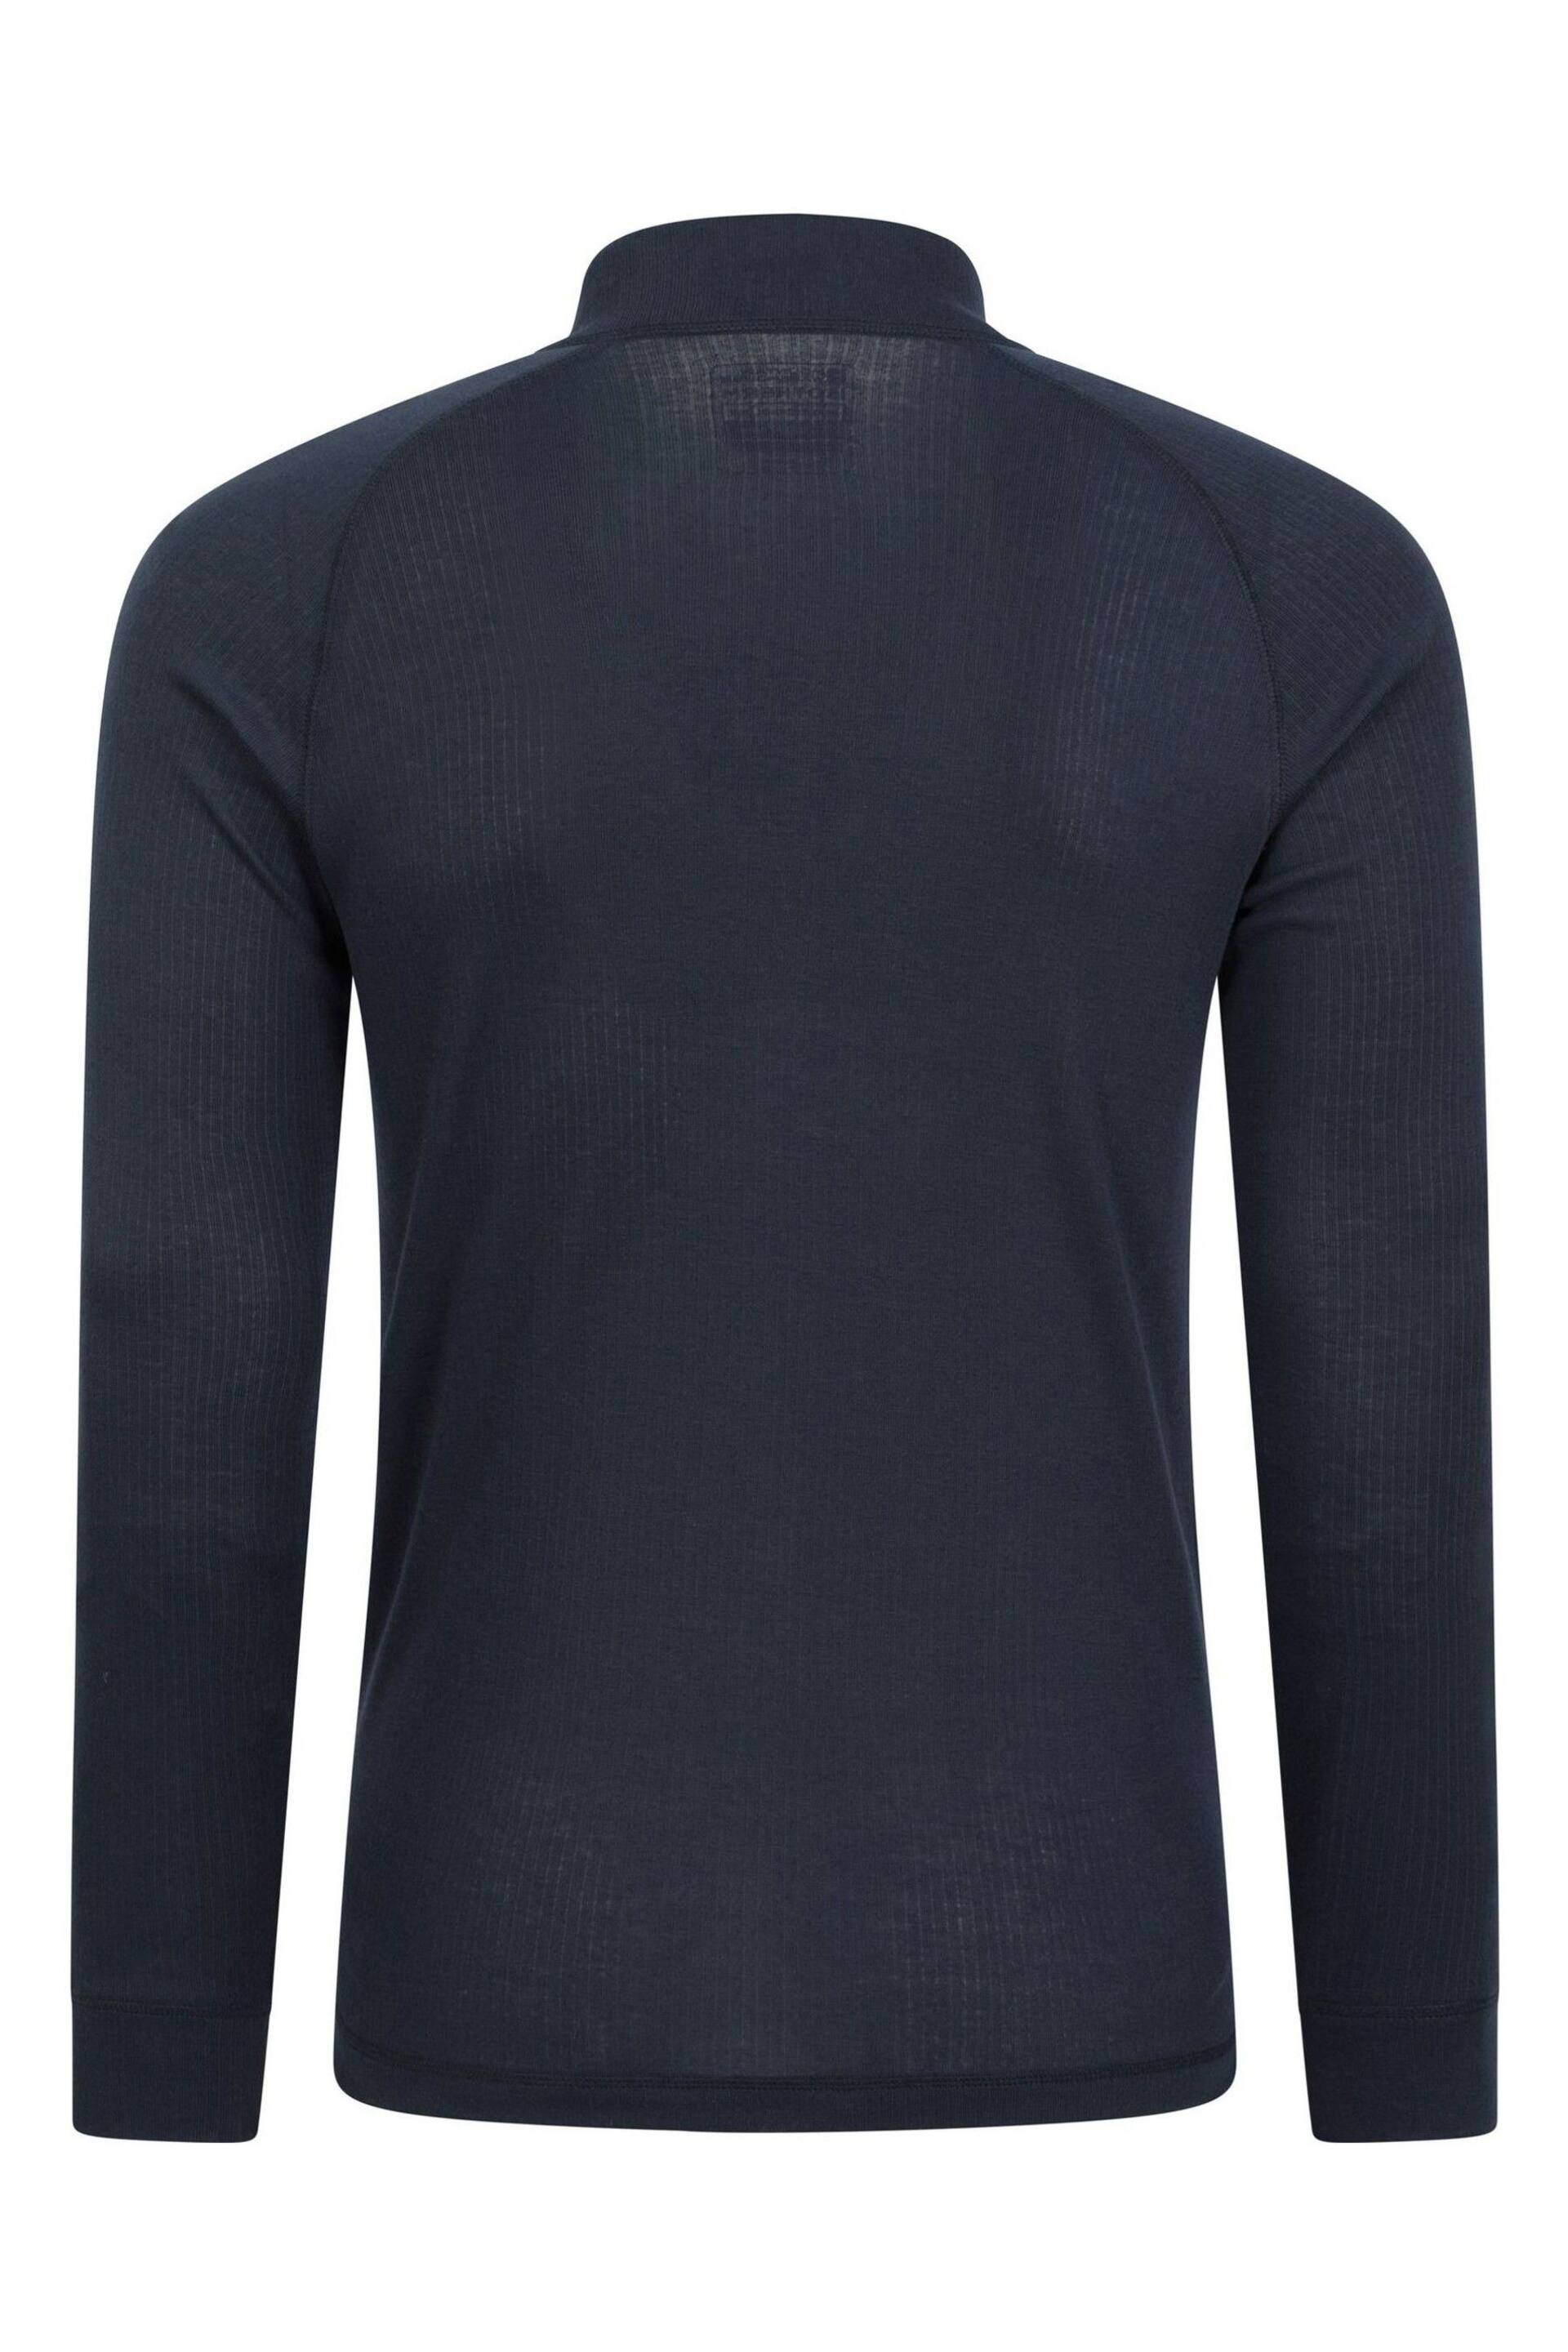 Mountain Warehouse Blue Mens Talus Zip Neck Thermal Top - Image 3 of 5